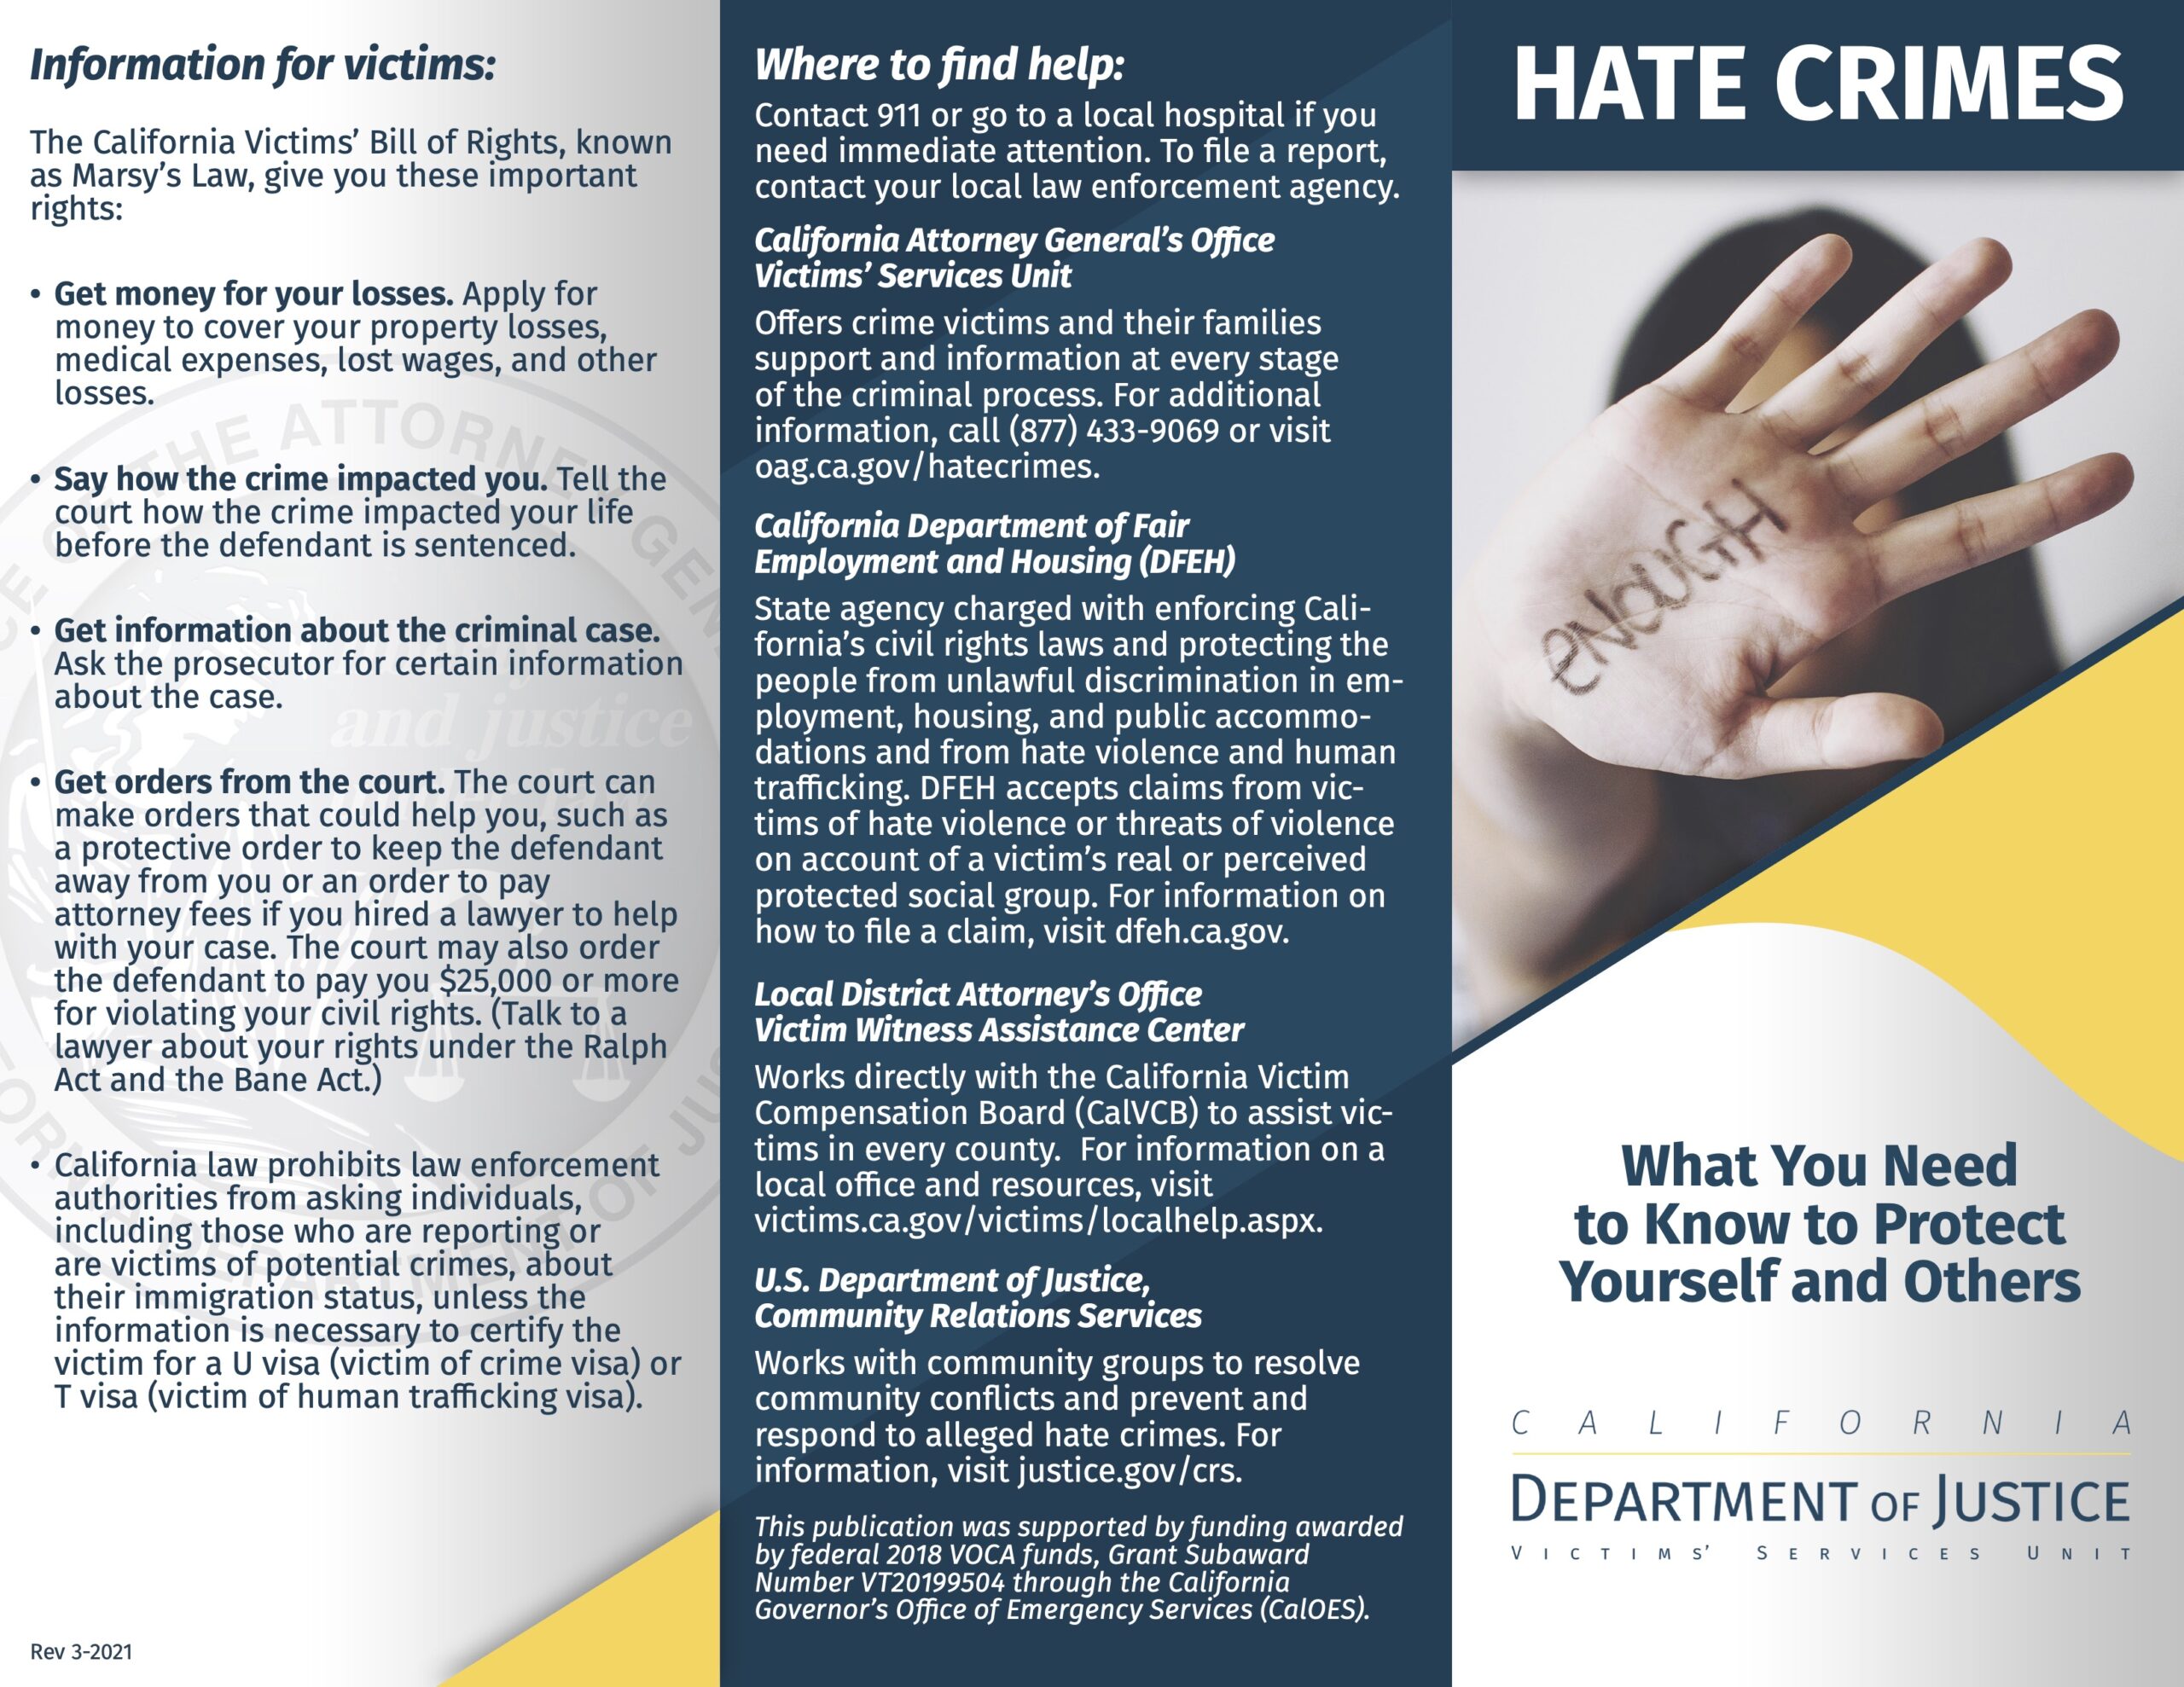 Hate Crimes: Information For Victims And Where To Find Help 